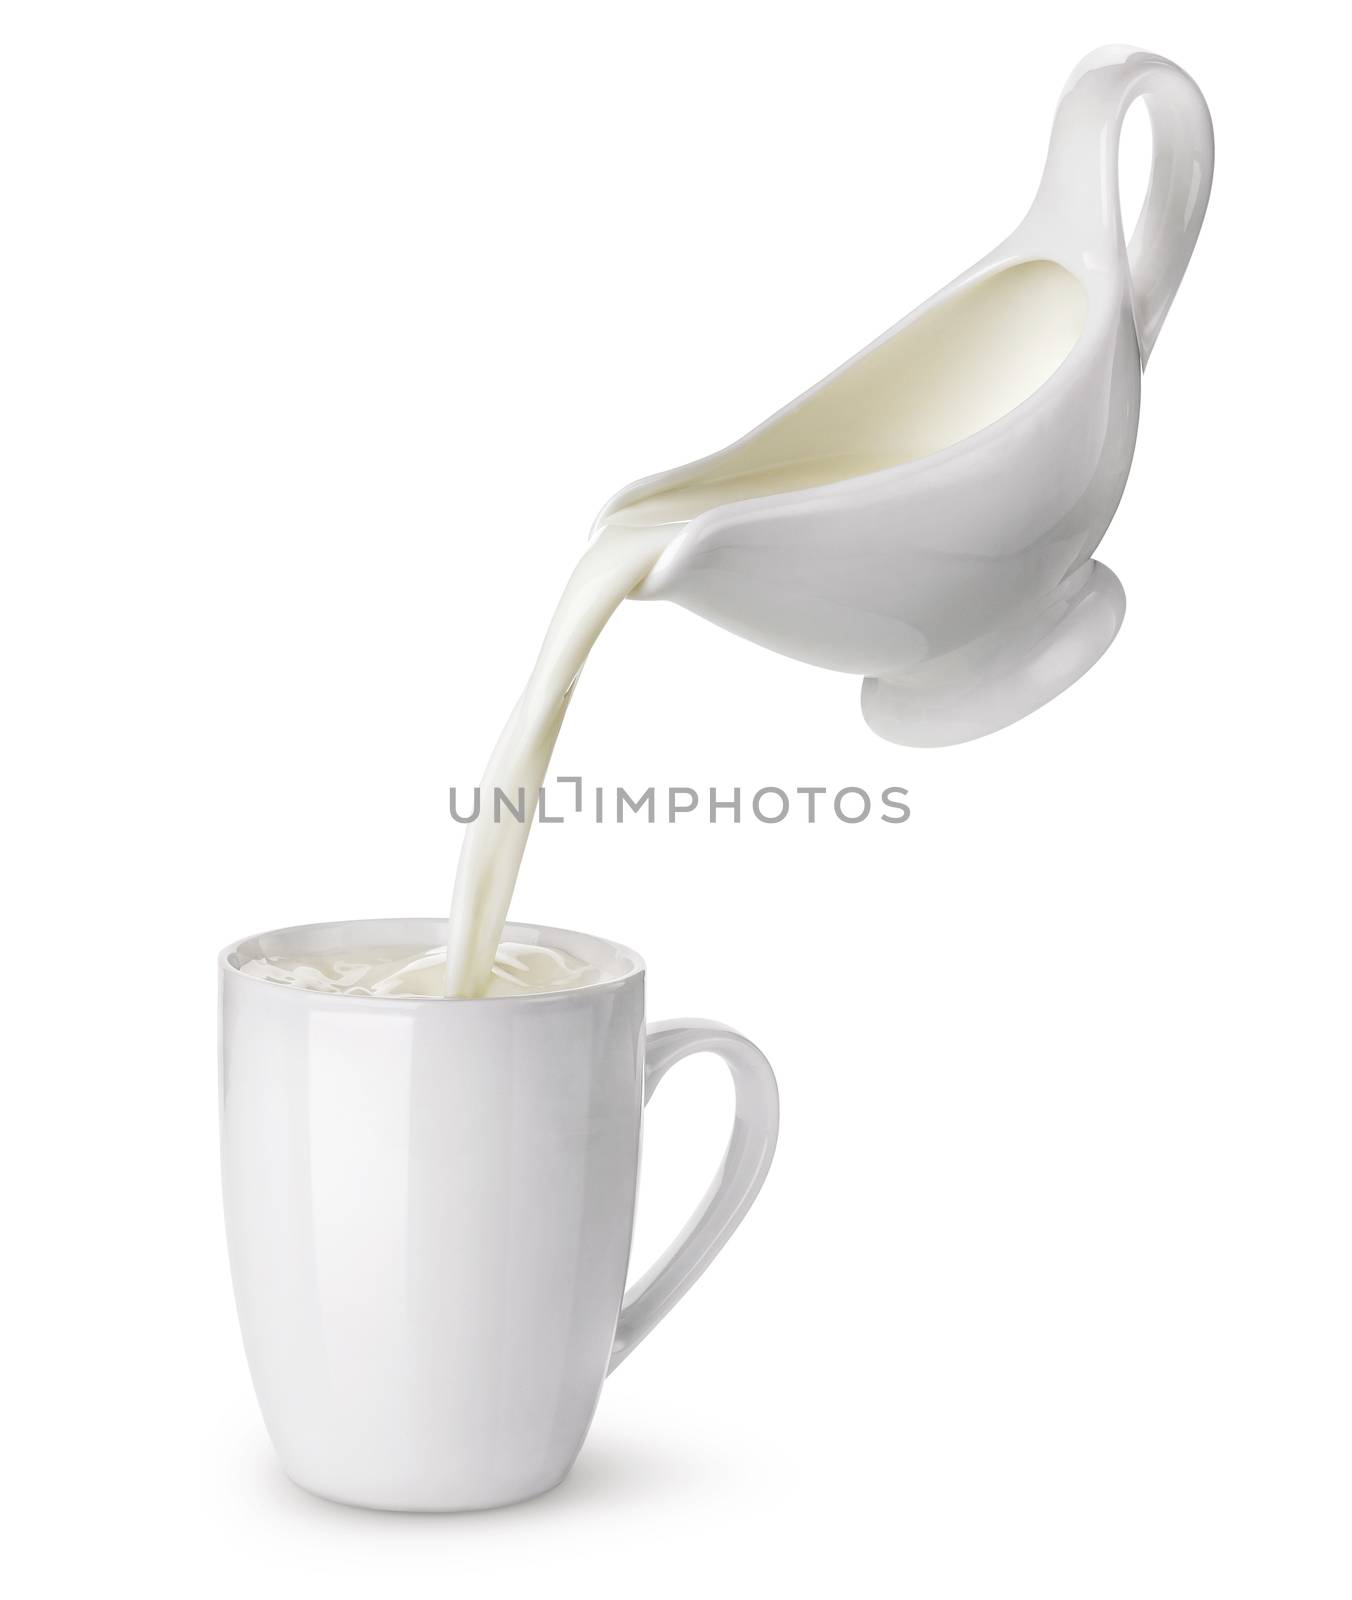 Pouring cream from creamer into ceramic cup with splash isolated on white background, flowing milk